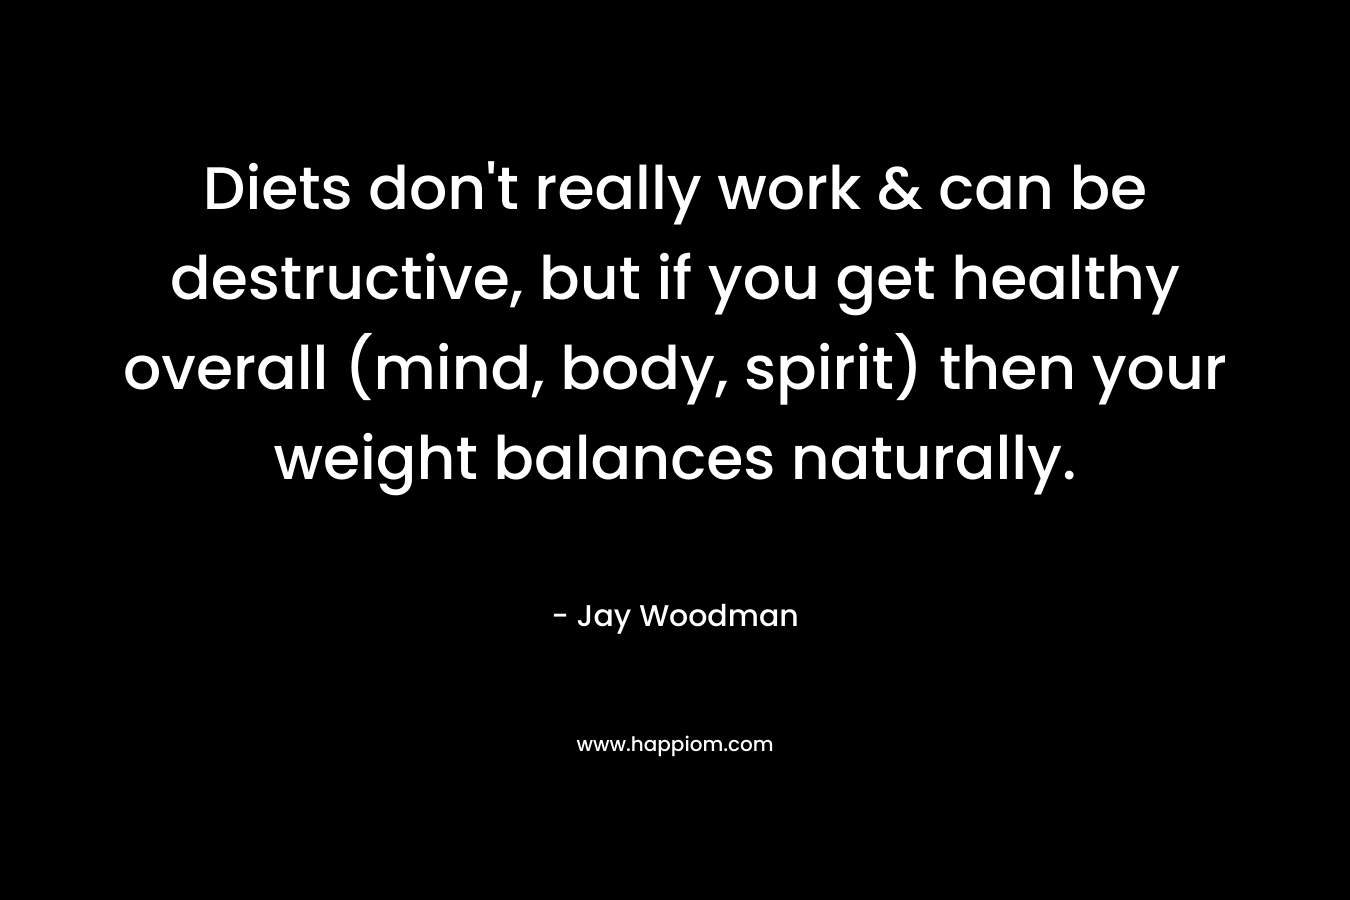 Diets don’t really work & can be destructive, but if you get healthy overall (mind, body, spirit) then your weight balances naturally. – Jay Woodman